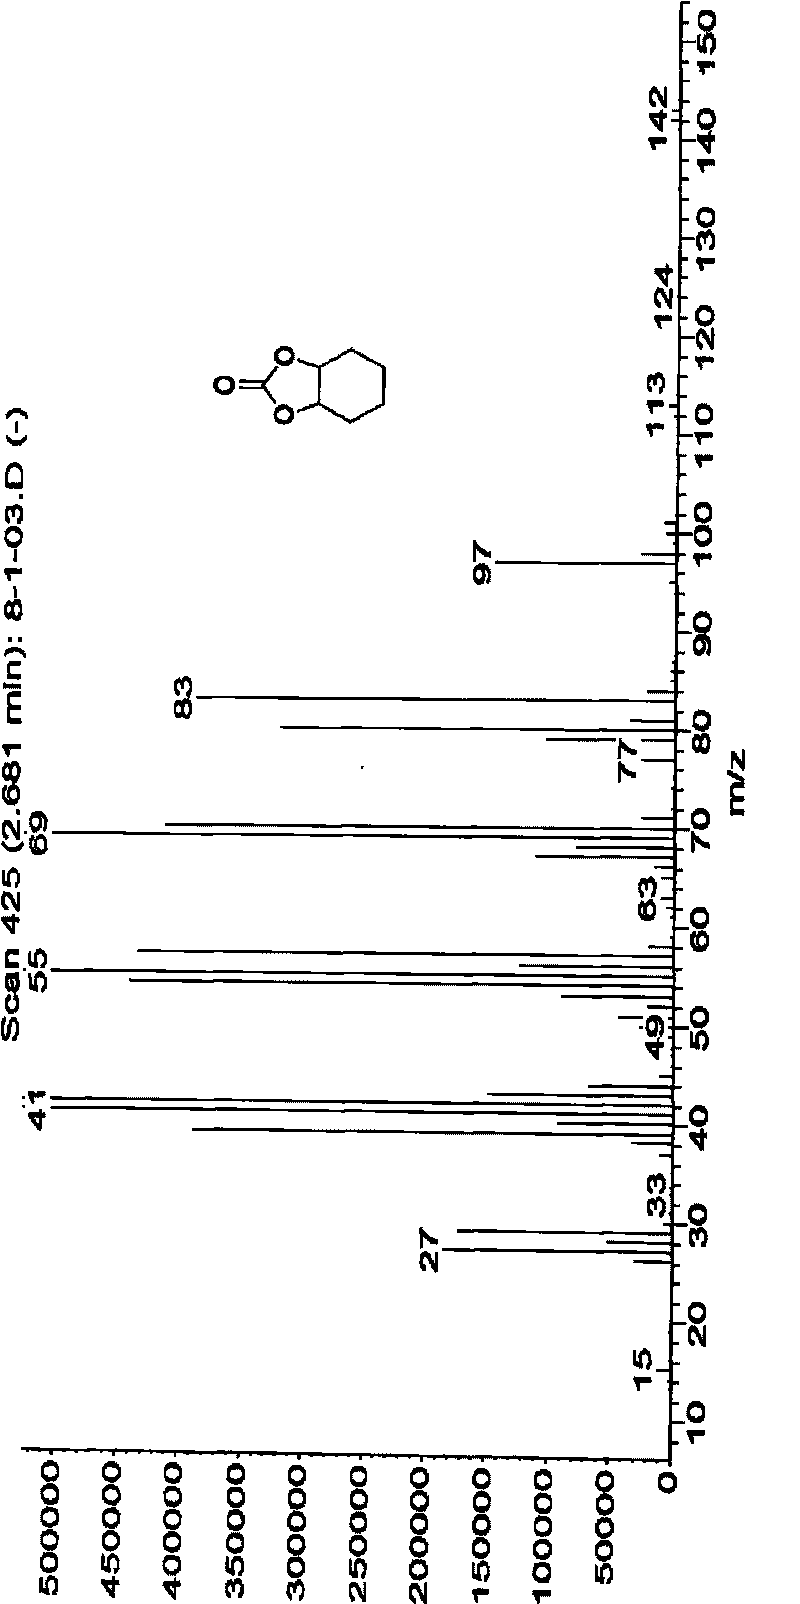 Method for synthesizing cyclic carbonate ester in presence of acidic ionic liquid catalyst